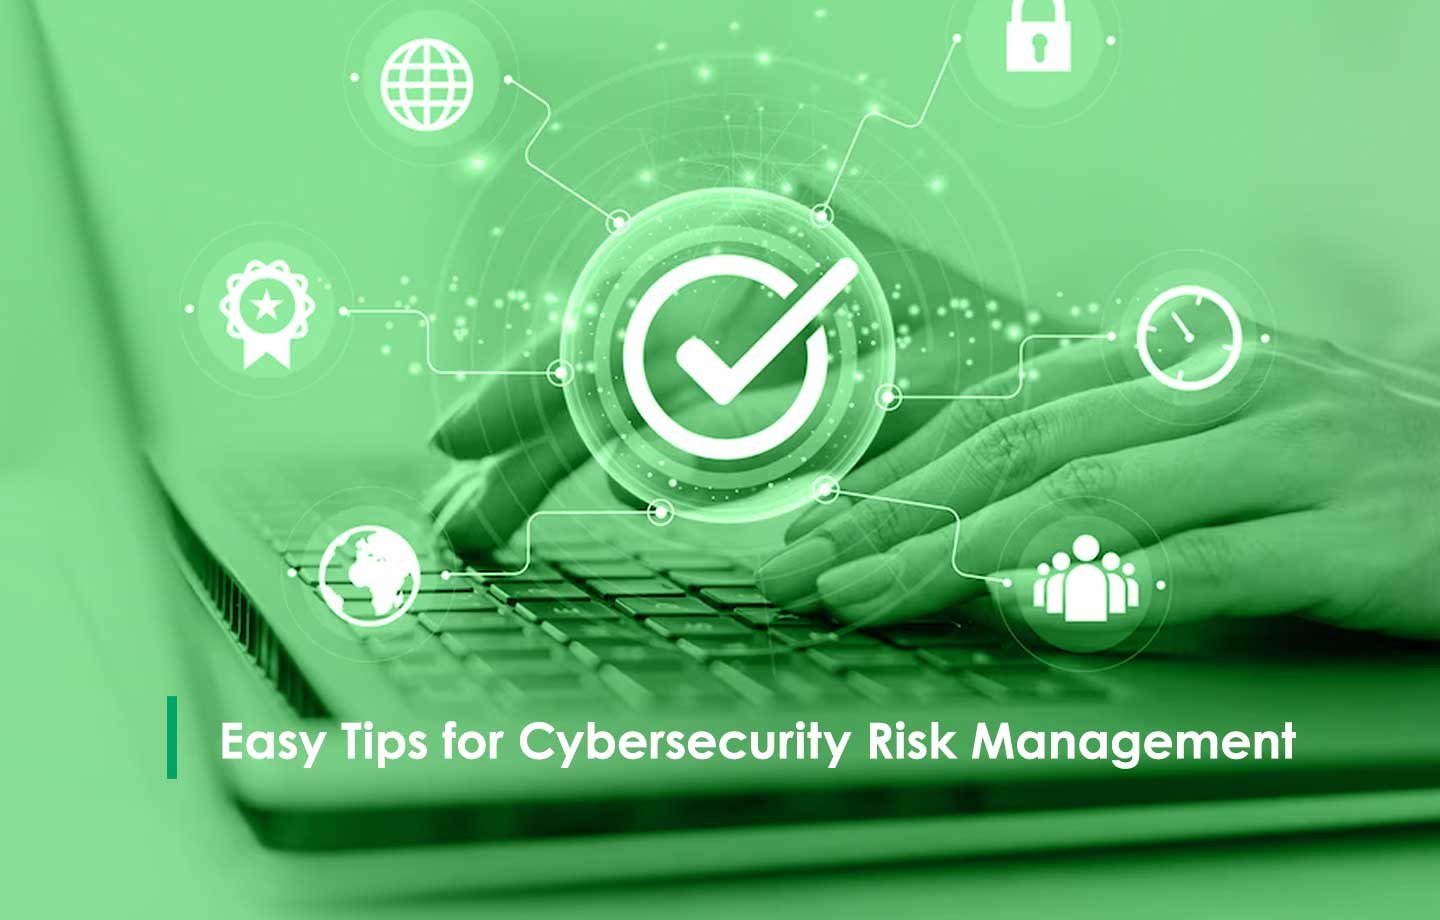 Easy Tips for Cybersecurity Risk Management